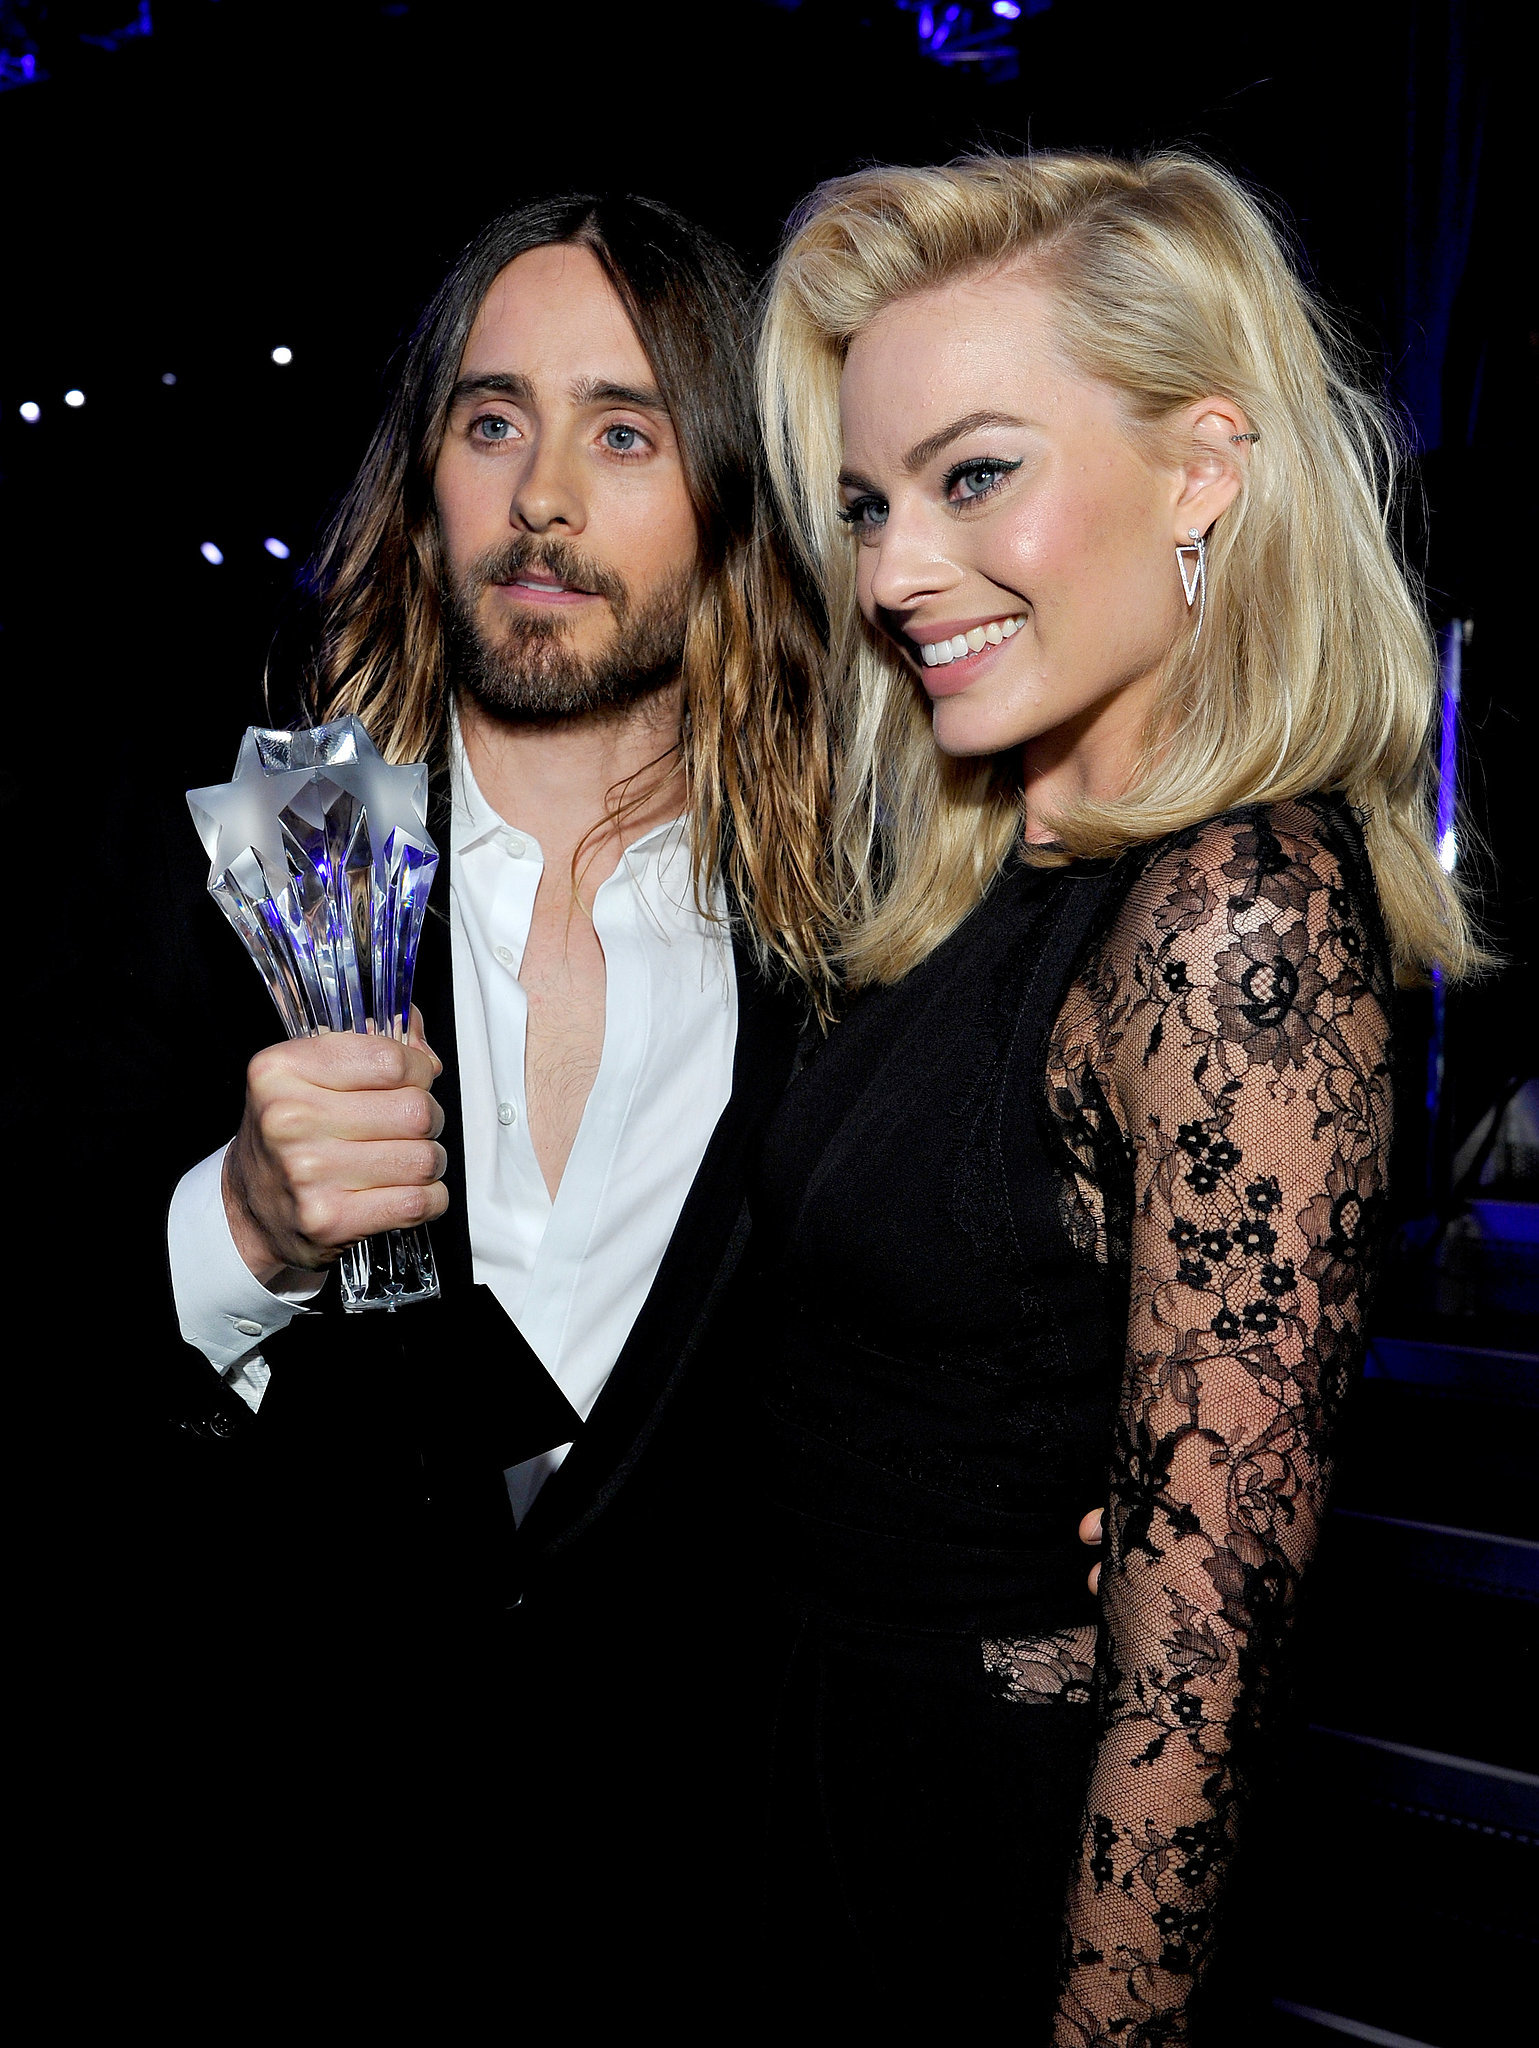 Margot-Robbie-Jared-Leto-arm-candy-he-posed-his-award.jpg